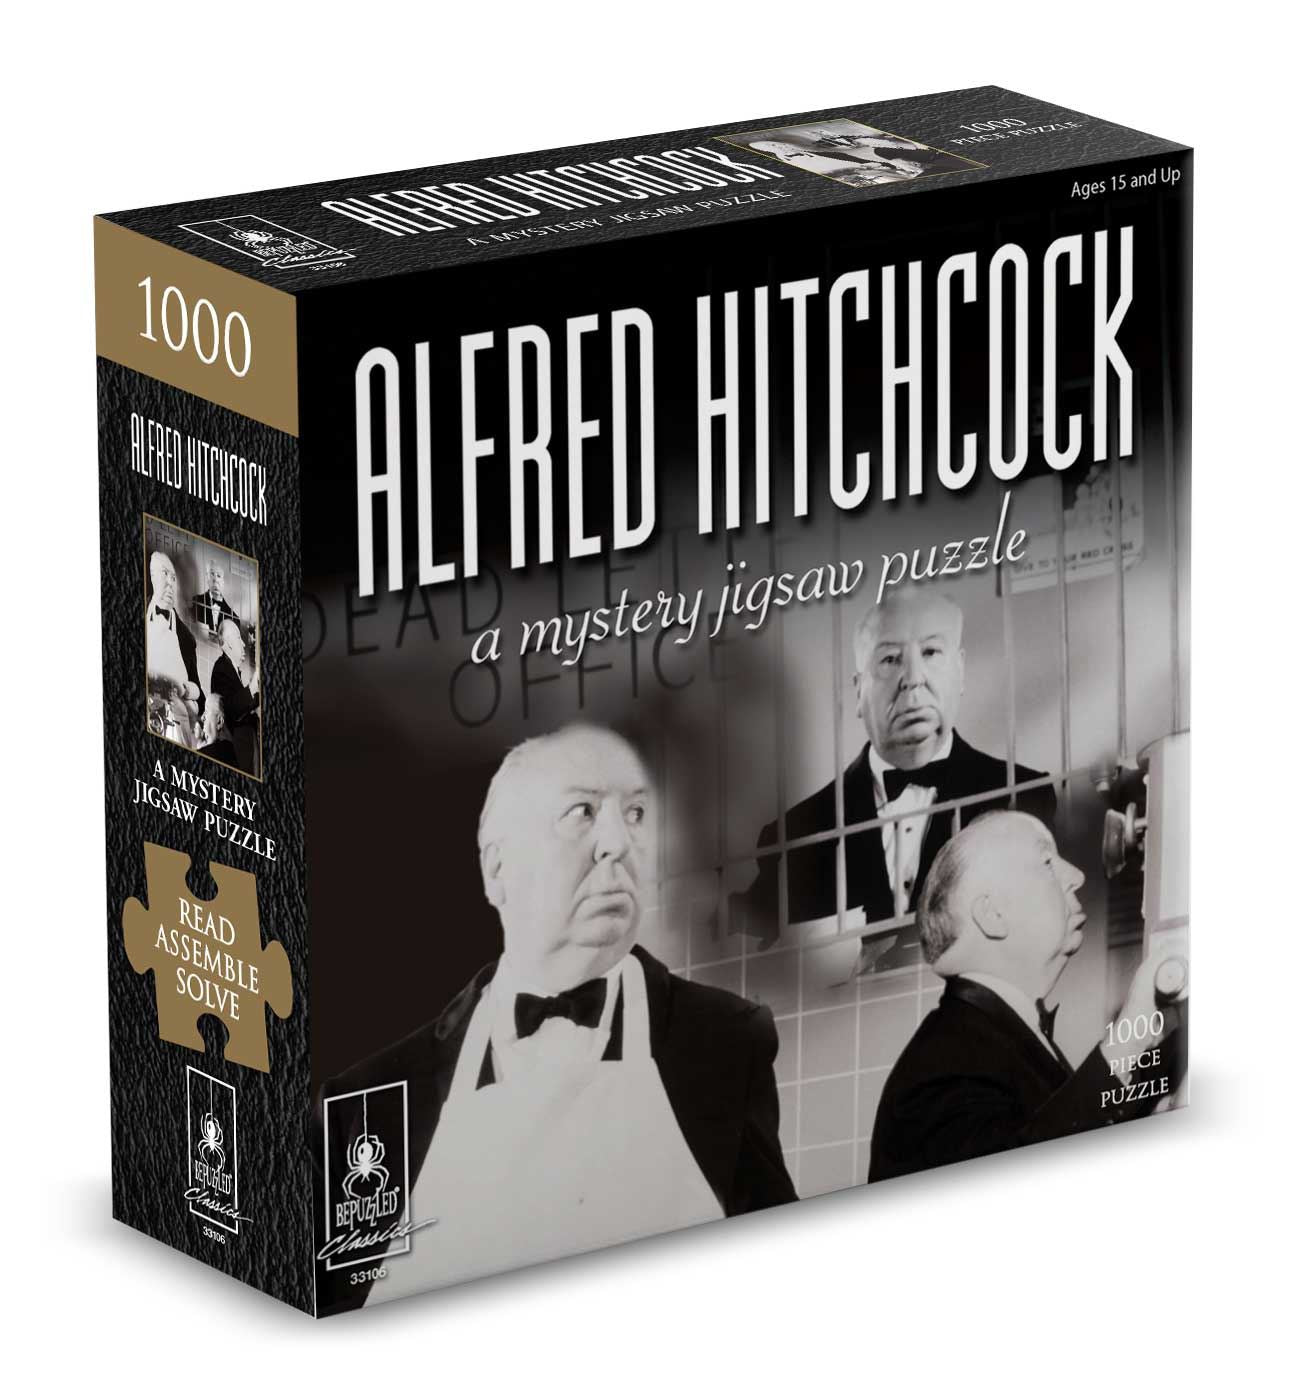 Alfred Hitchcock Mystery Jigsaw Puzzle (1000 Pieces)